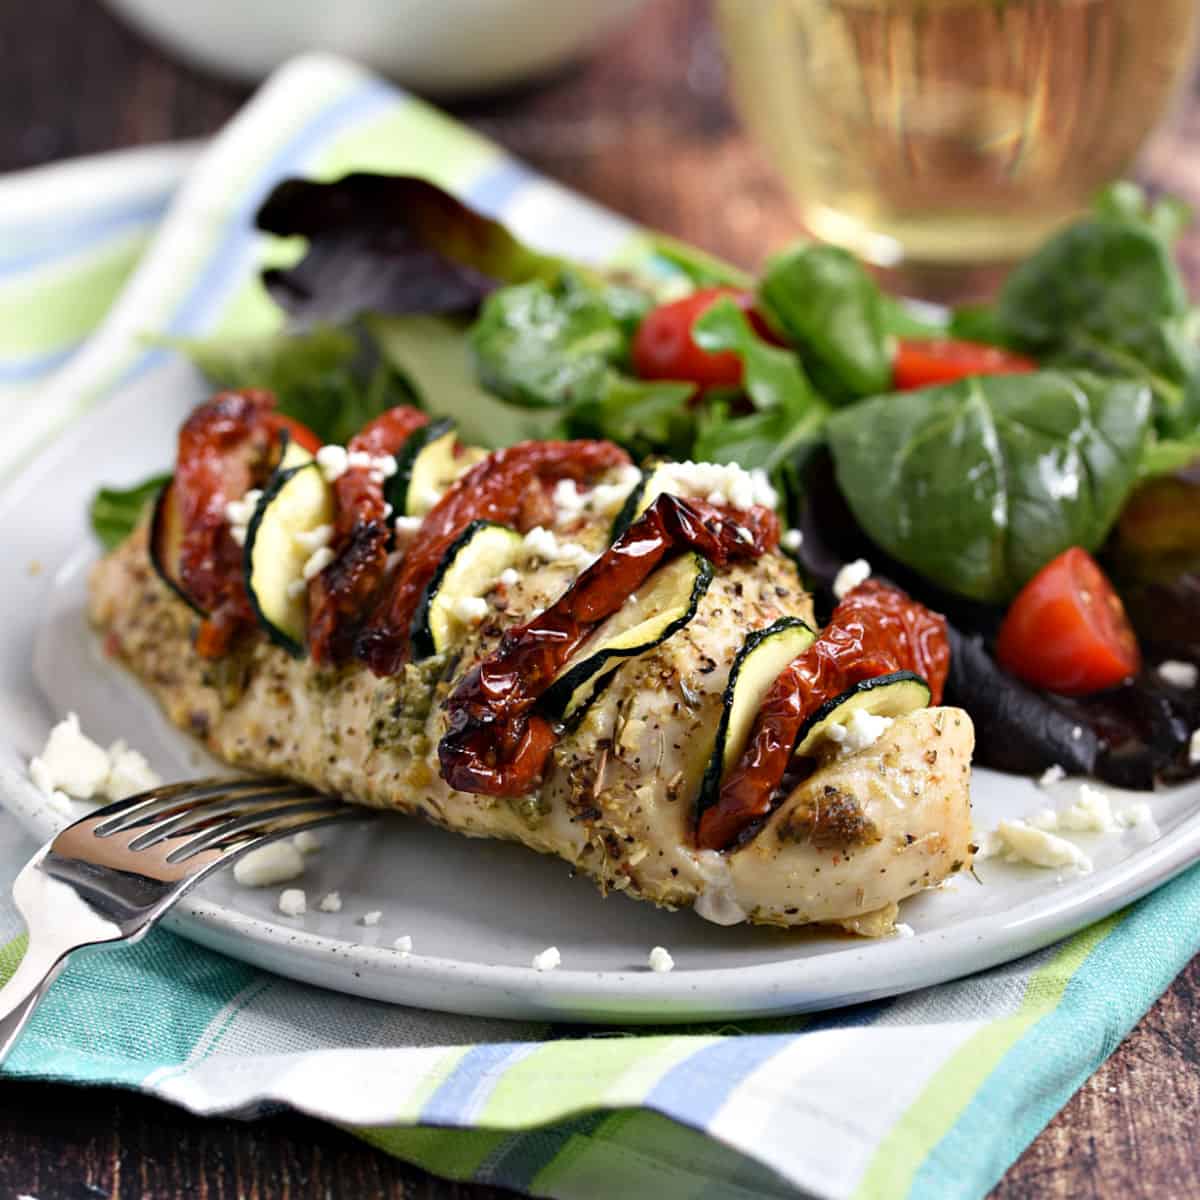 Chicken breast stuffed with pesto, sun-dried tomatoes and zucchini slices on a plate with mixed greens and cherry tomatoes.